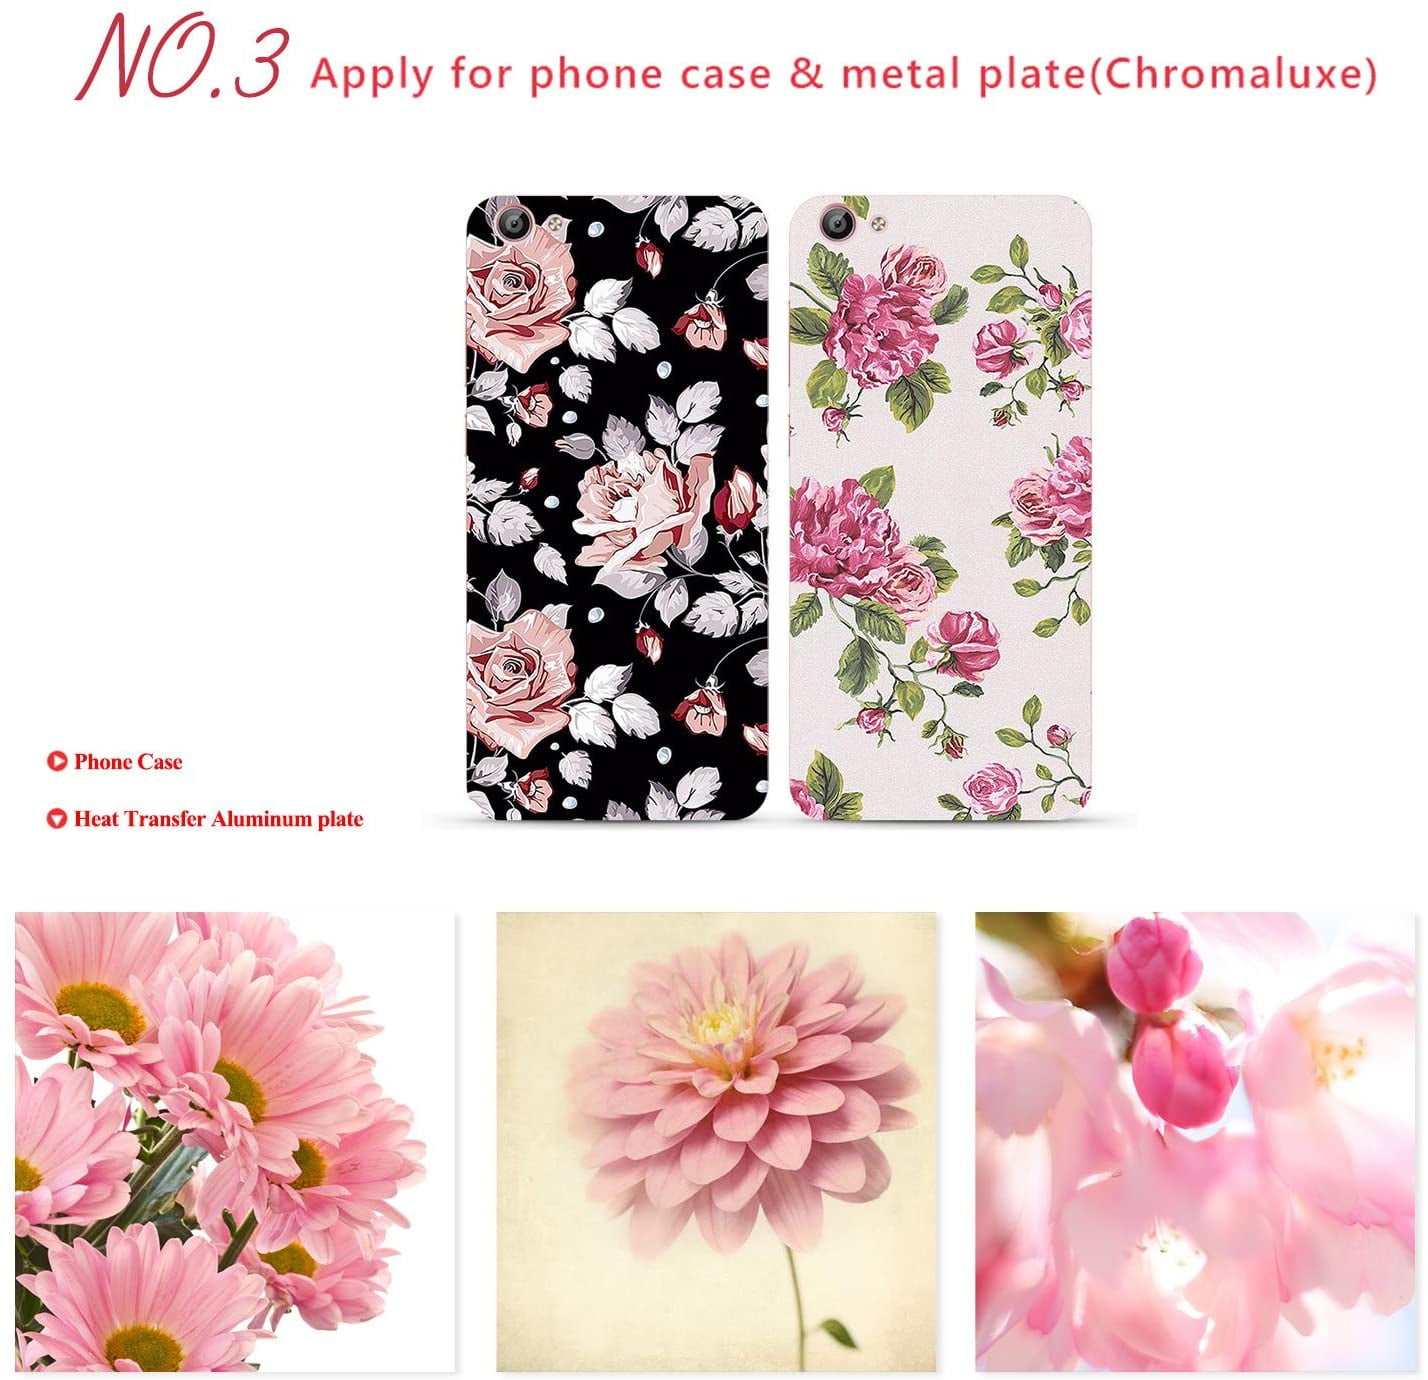 Heat Transfer Rose Flower Display Plaque Sublimation Rose Memory MDF Board  Gift T84E - AliExpress